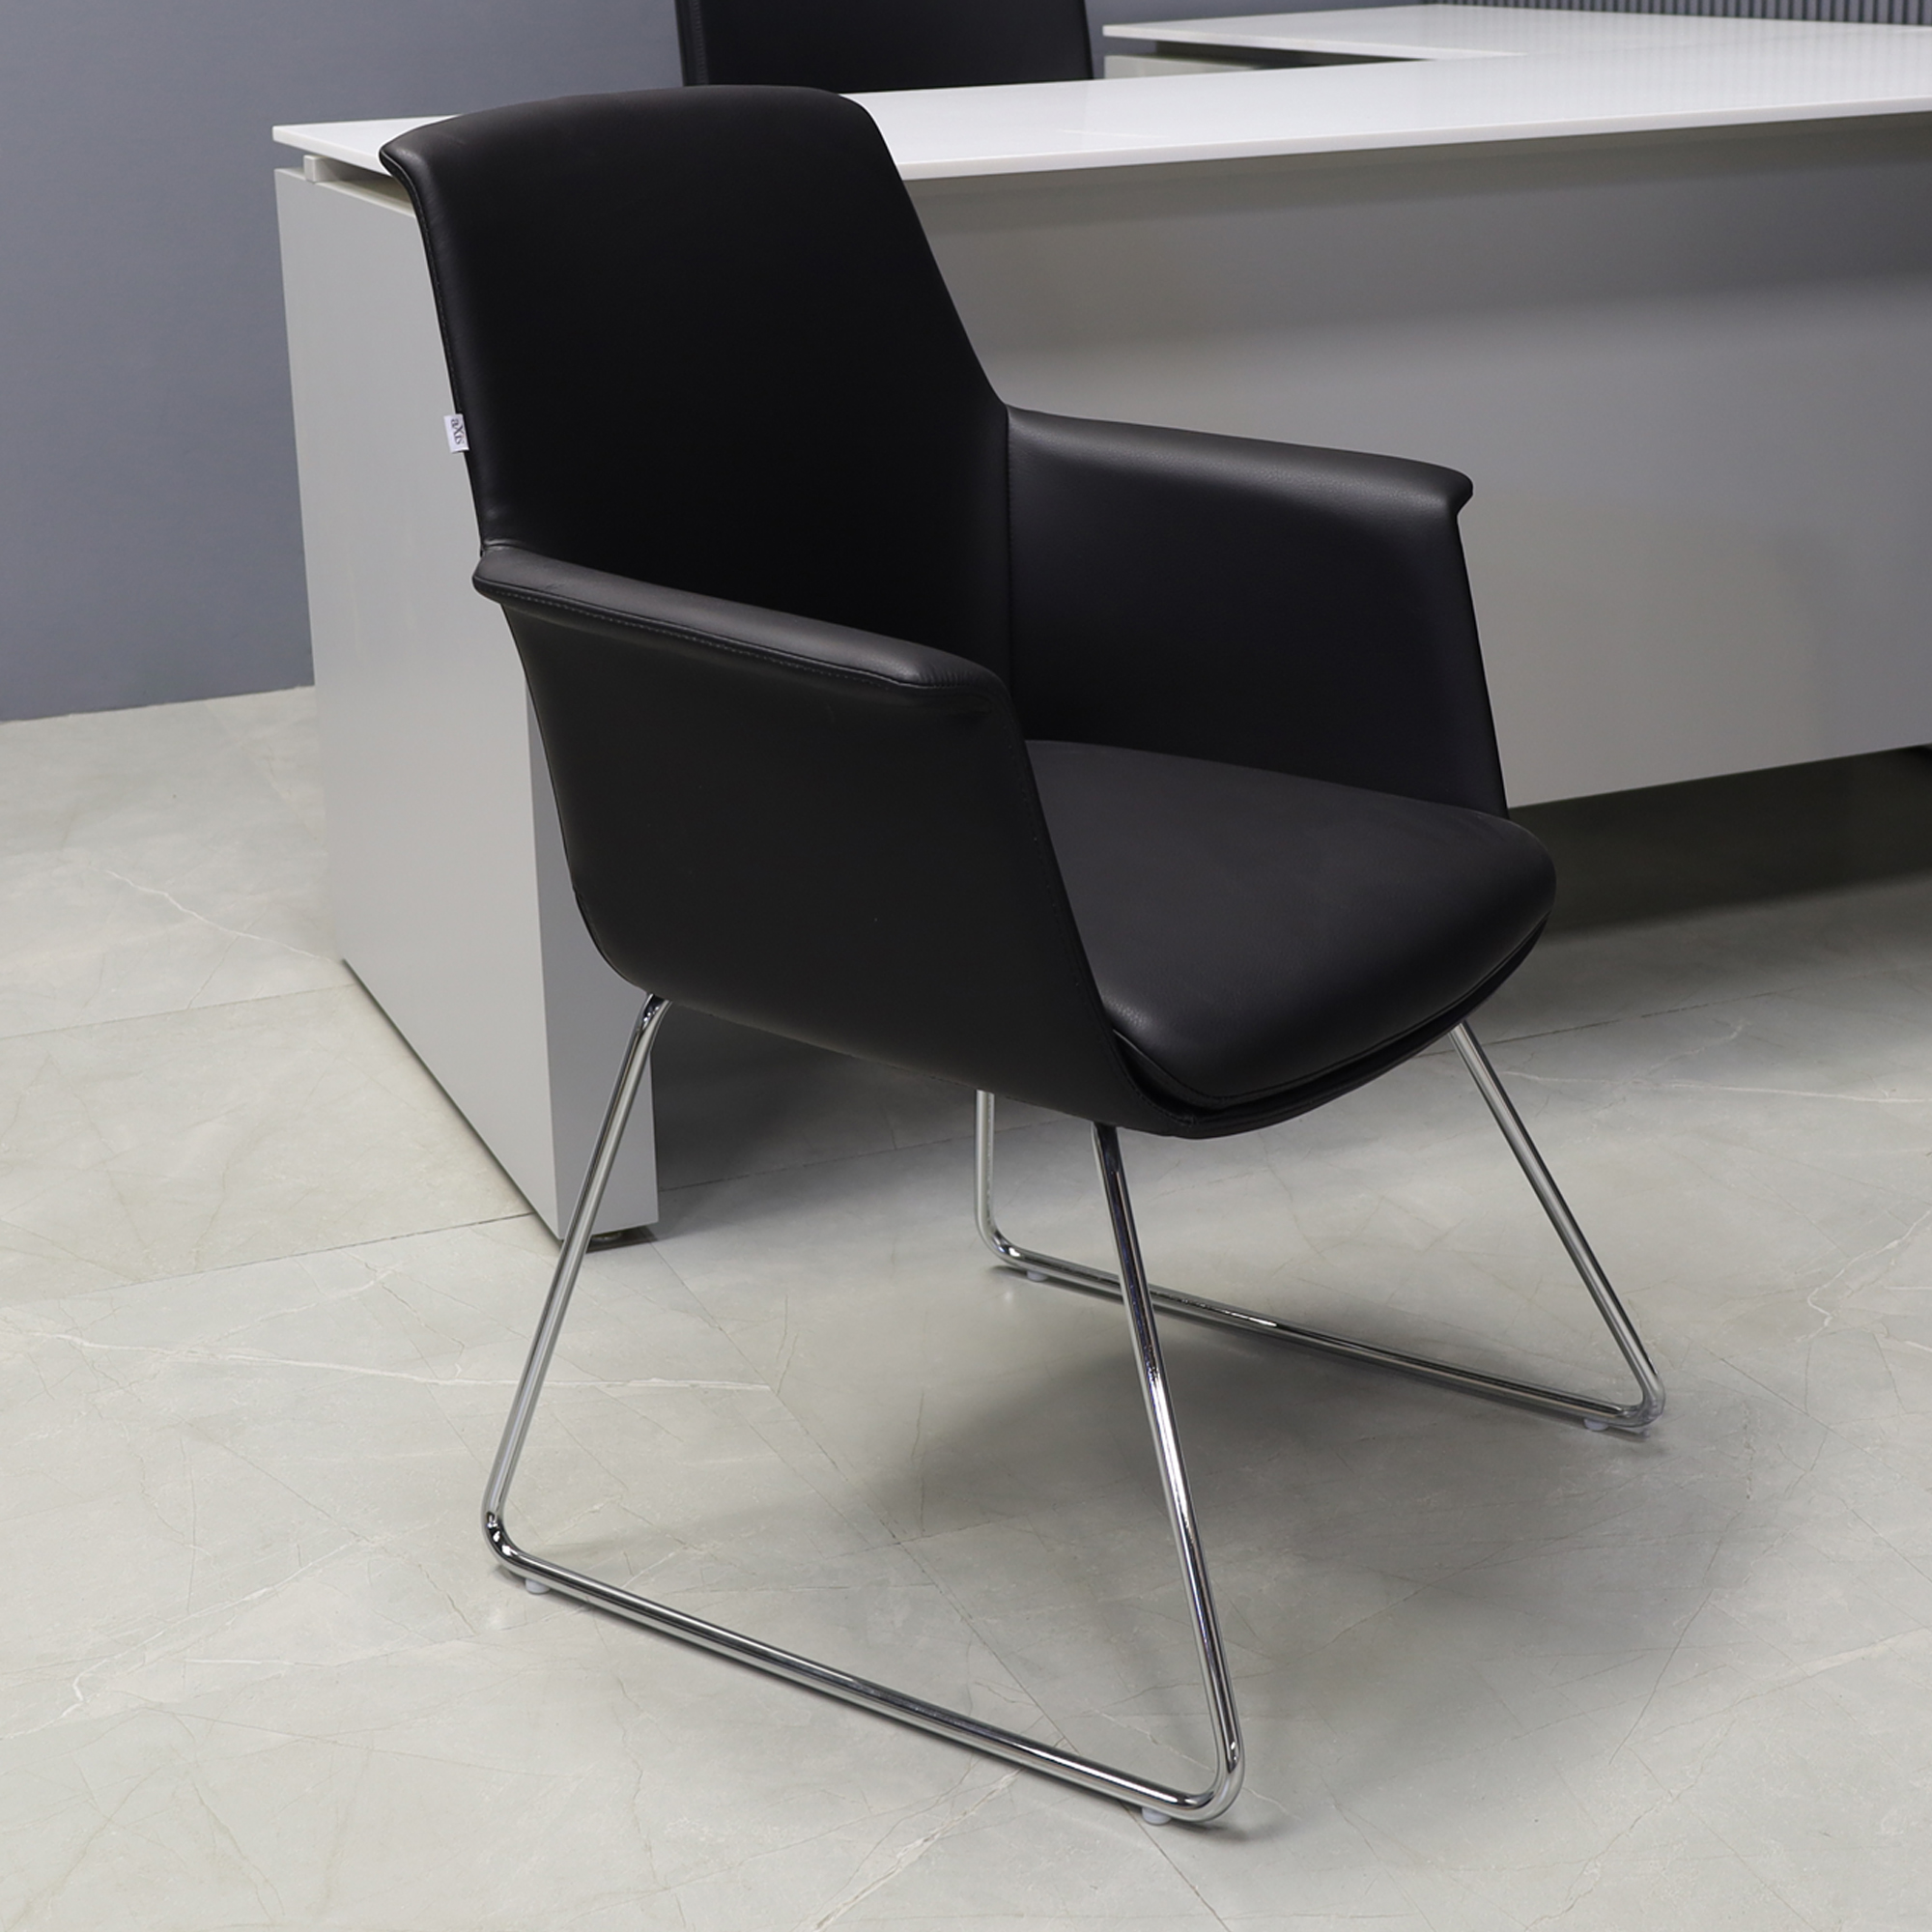 Archi Guest Chair in black upholstery, shown here.